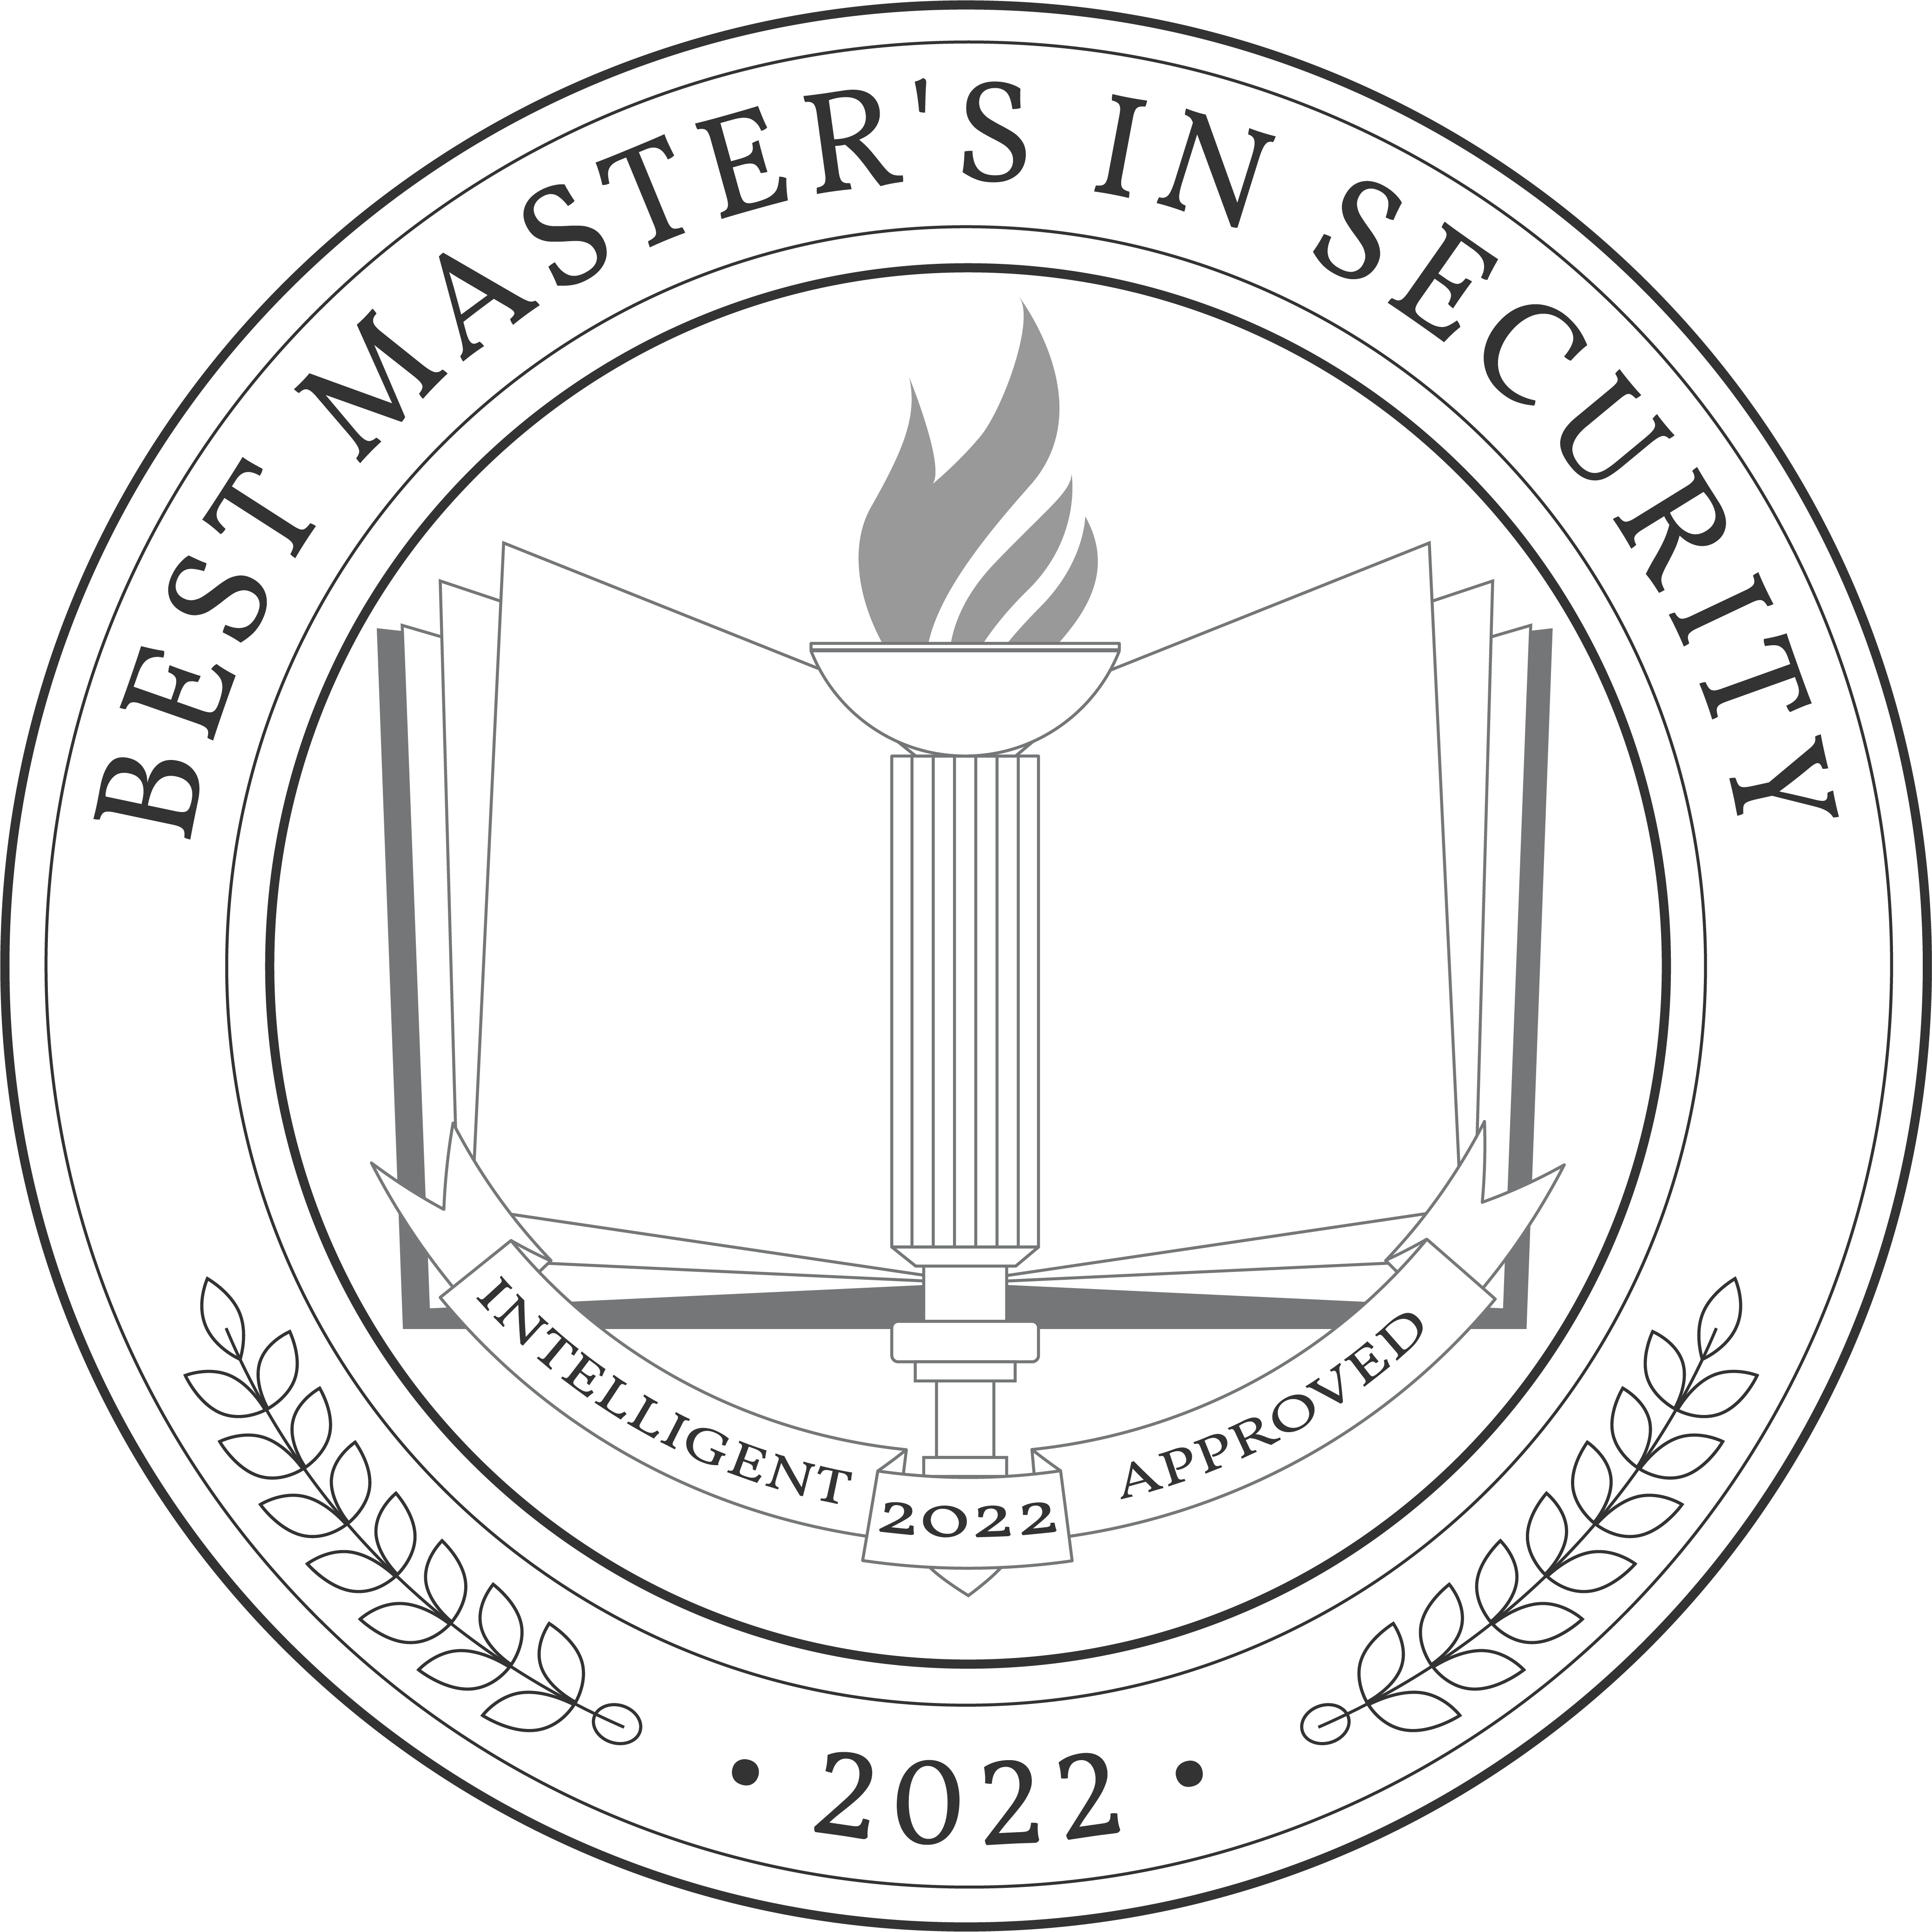 Best-Masters-in-Security-Badge-1.png